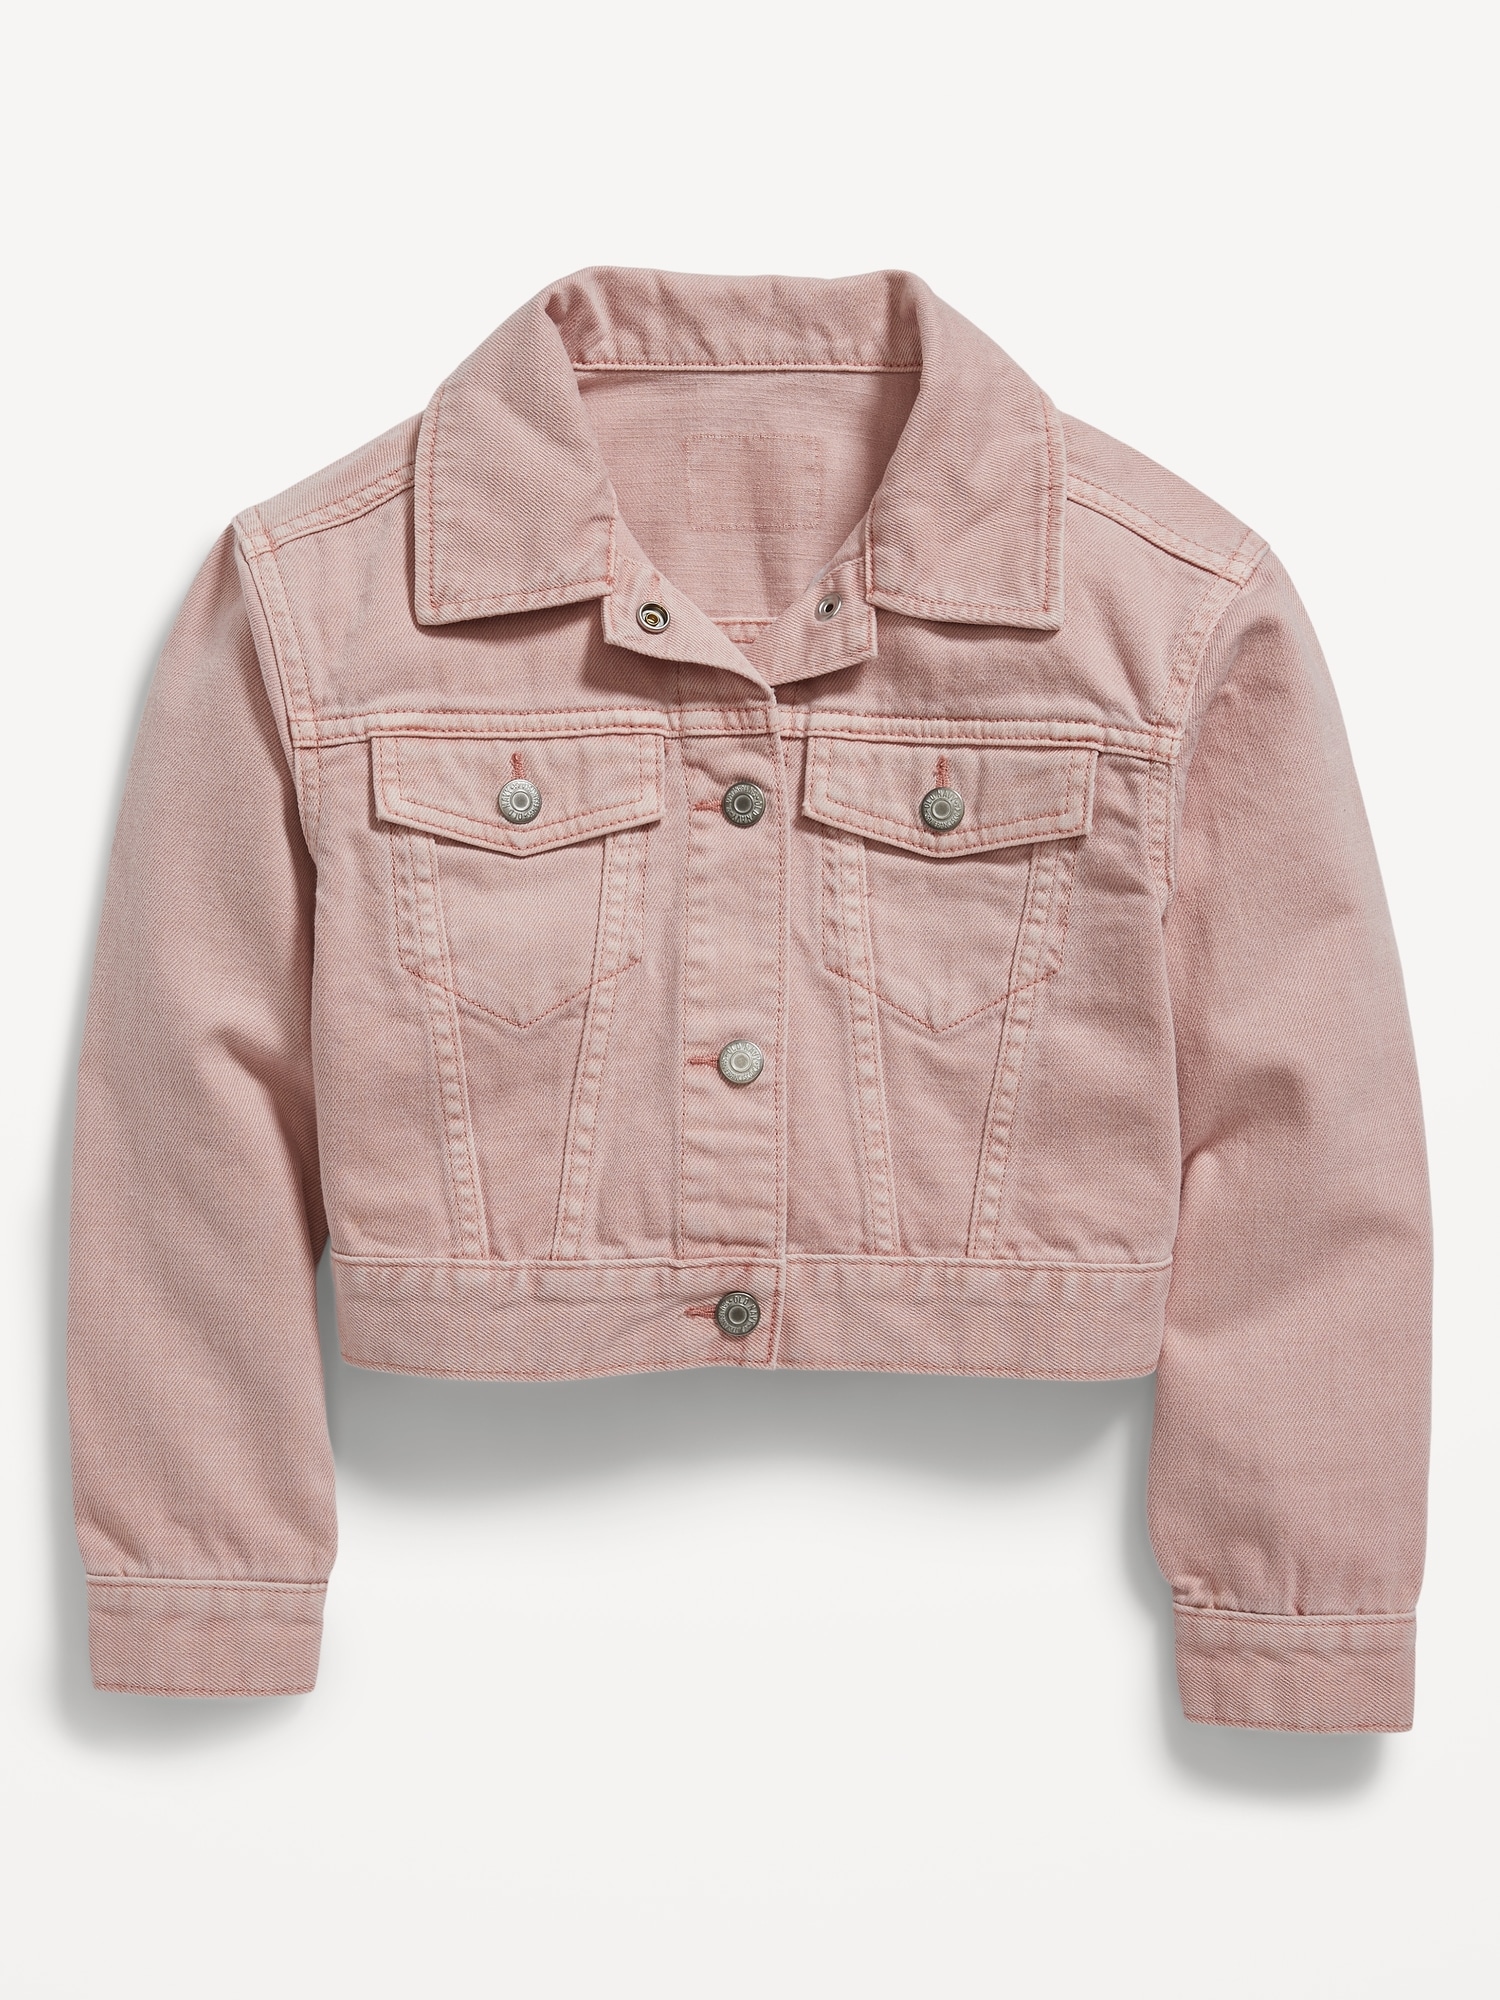 Old Navy Cropped Jean Trucker Jacket for Girls pink. 1